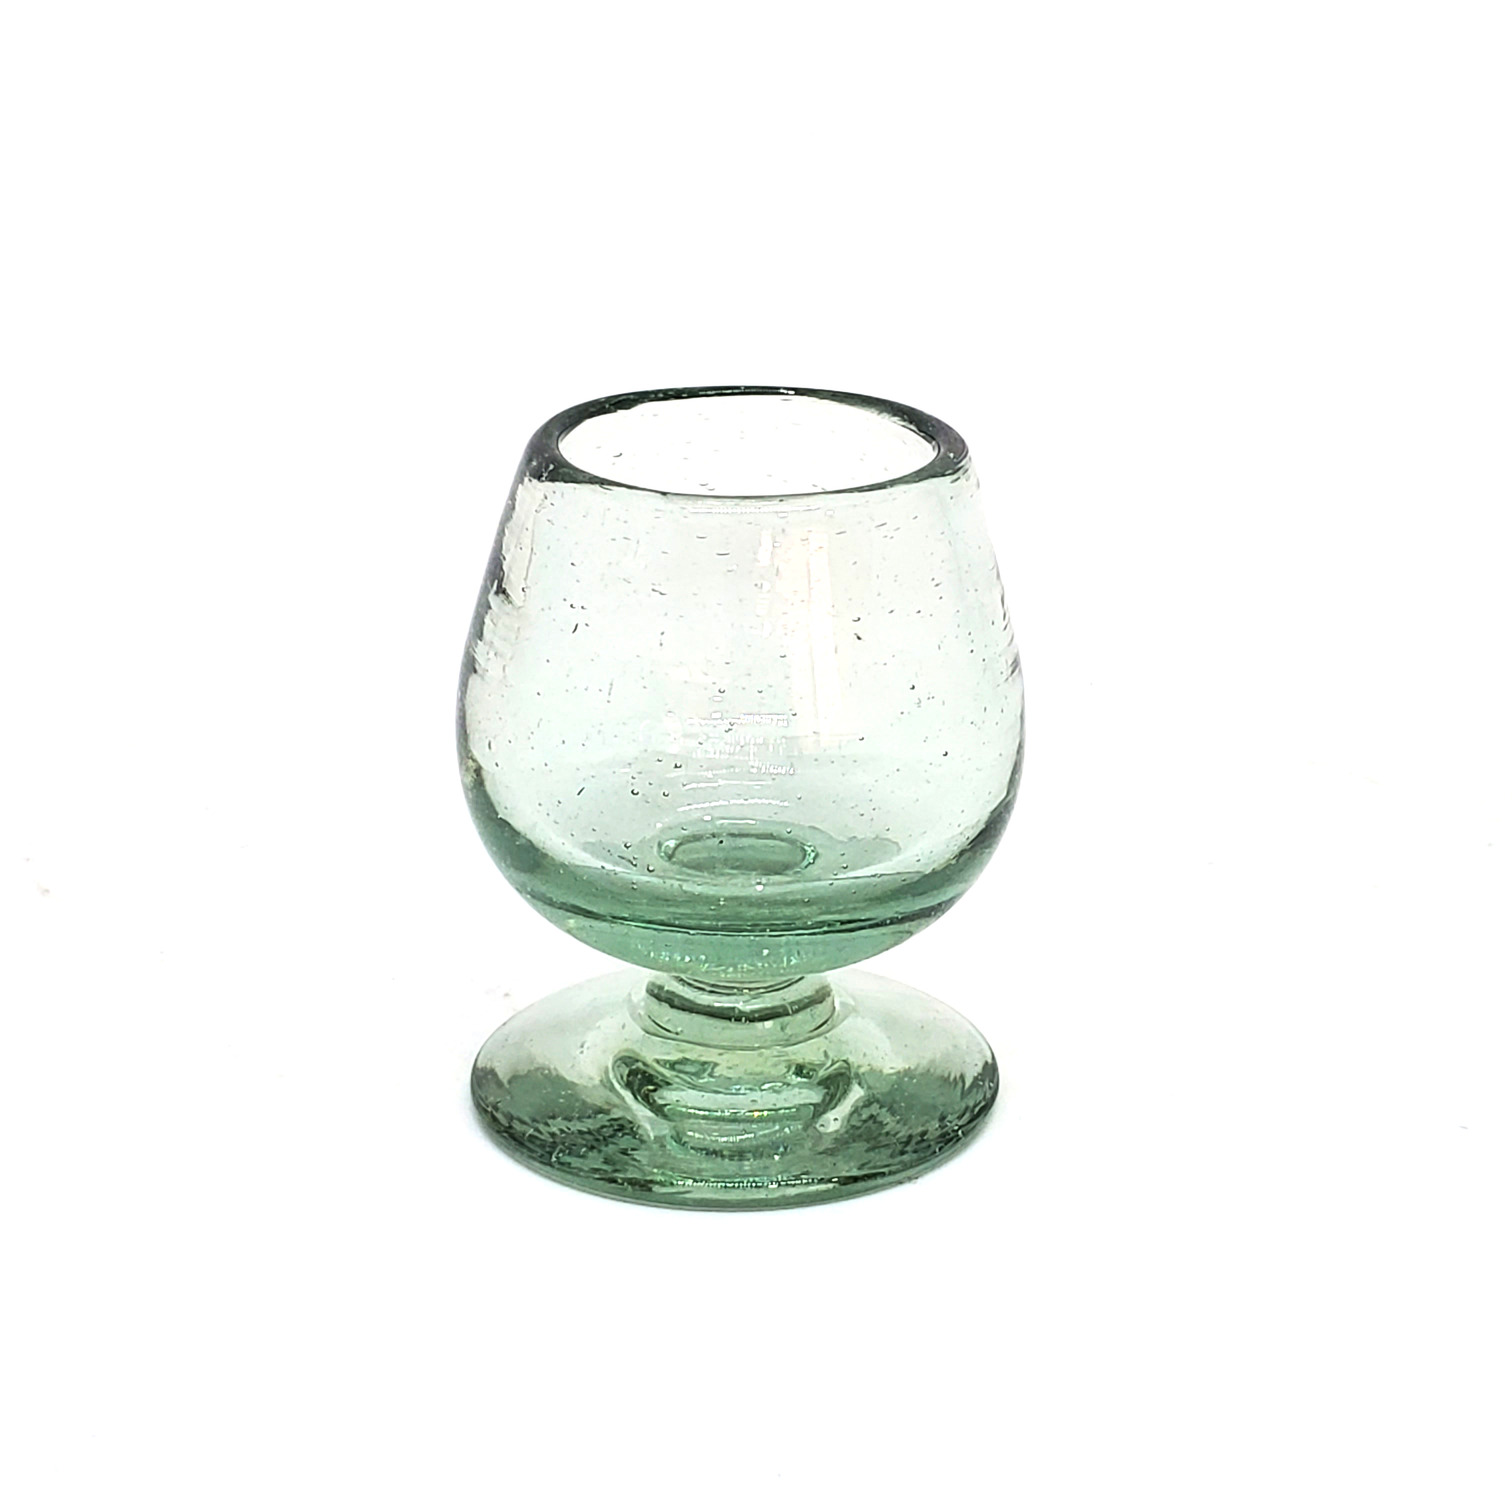 https://mexhandcraft.com/imgProducts/Clear%20Tequila%20Sippers%20(1).jpg